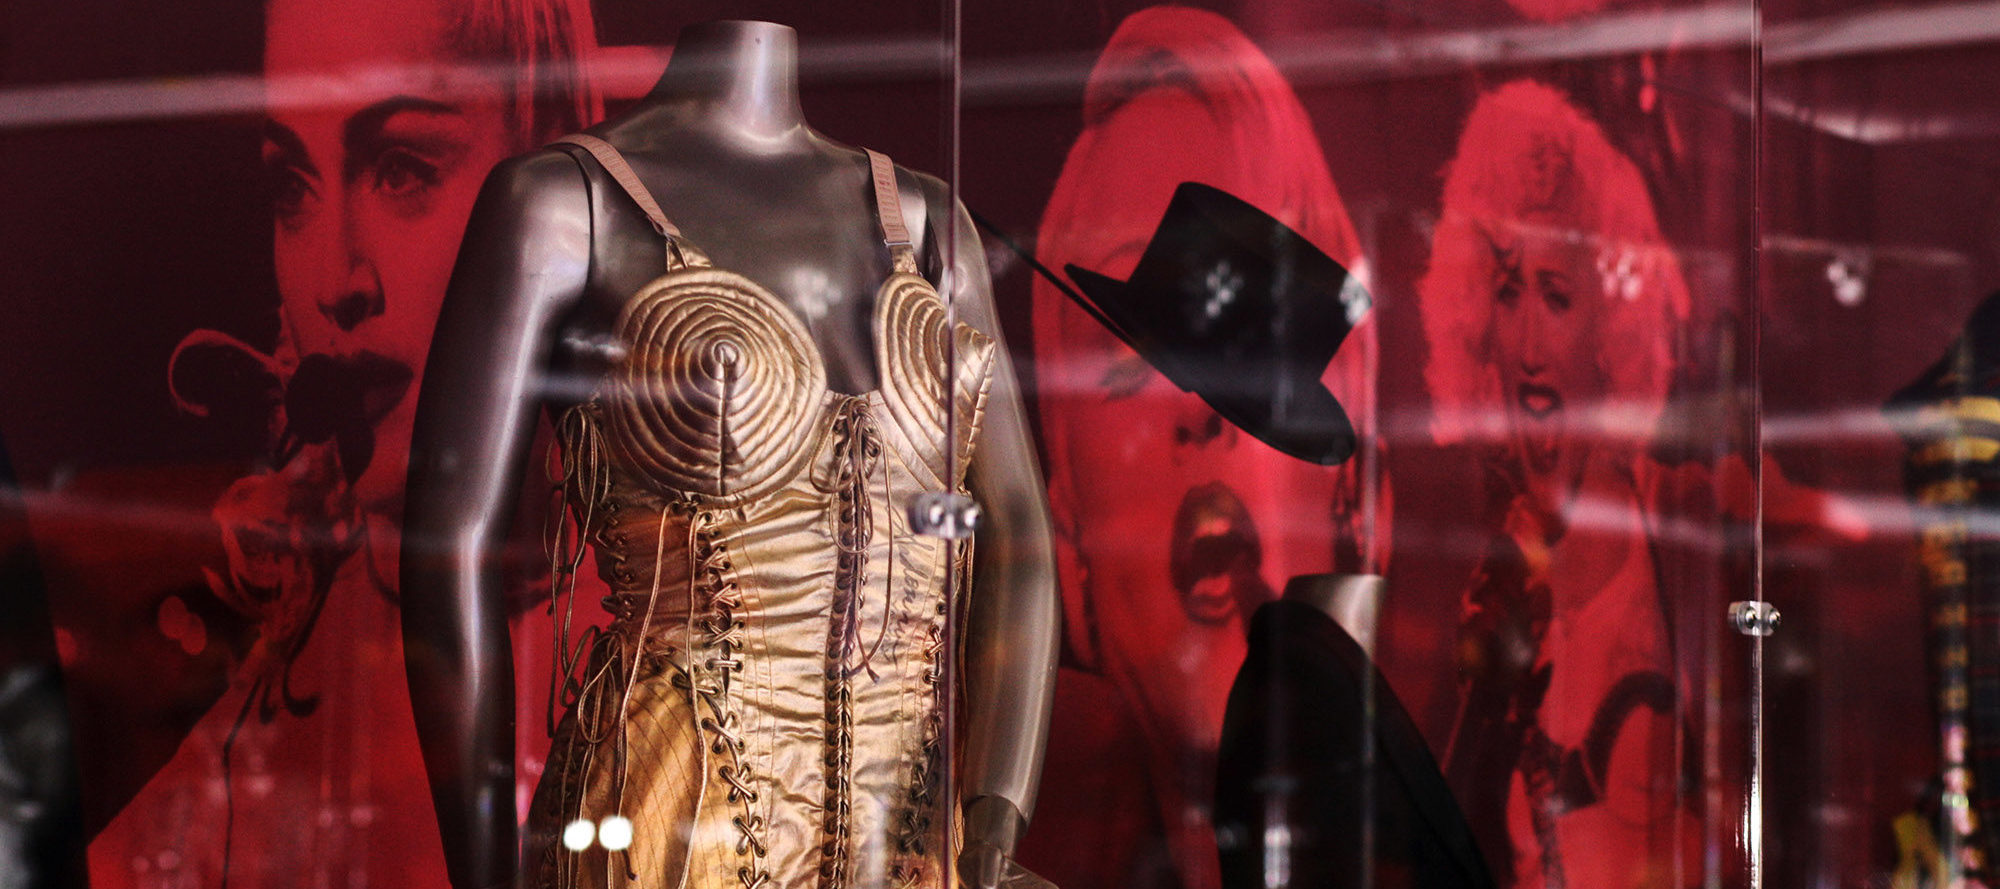 Display case showing an iconic outfit worn by Madonna, a gold thin strapped dress with conical breasts.